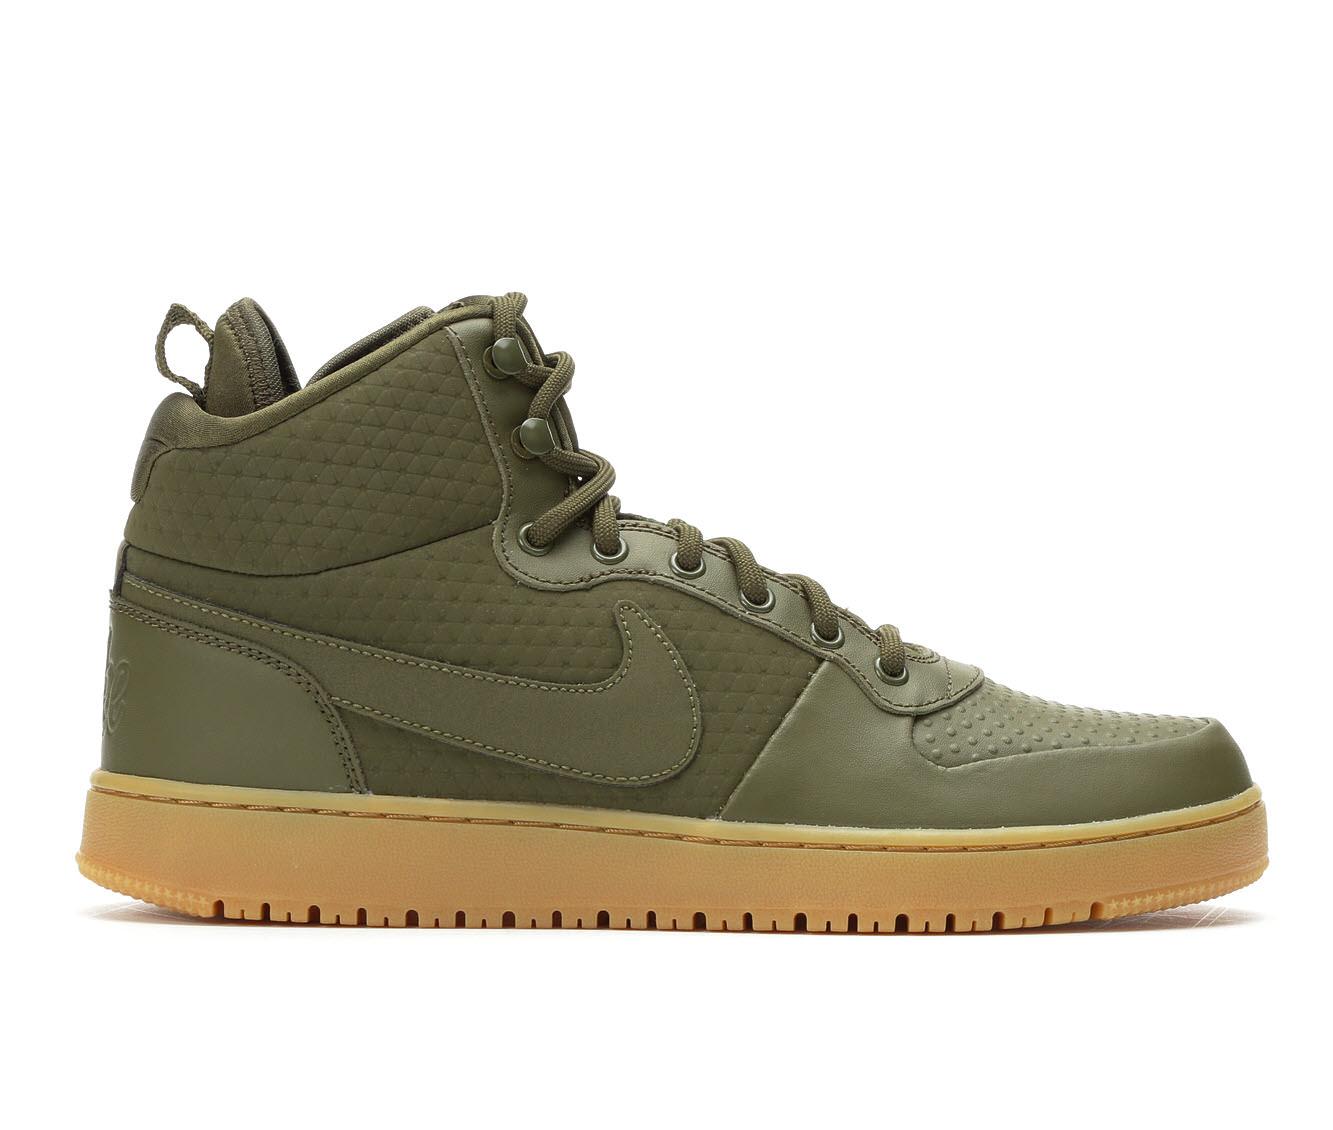 Nike Ebernon Mid Winter Sneaker Online Sale, UP TO 60% OFF